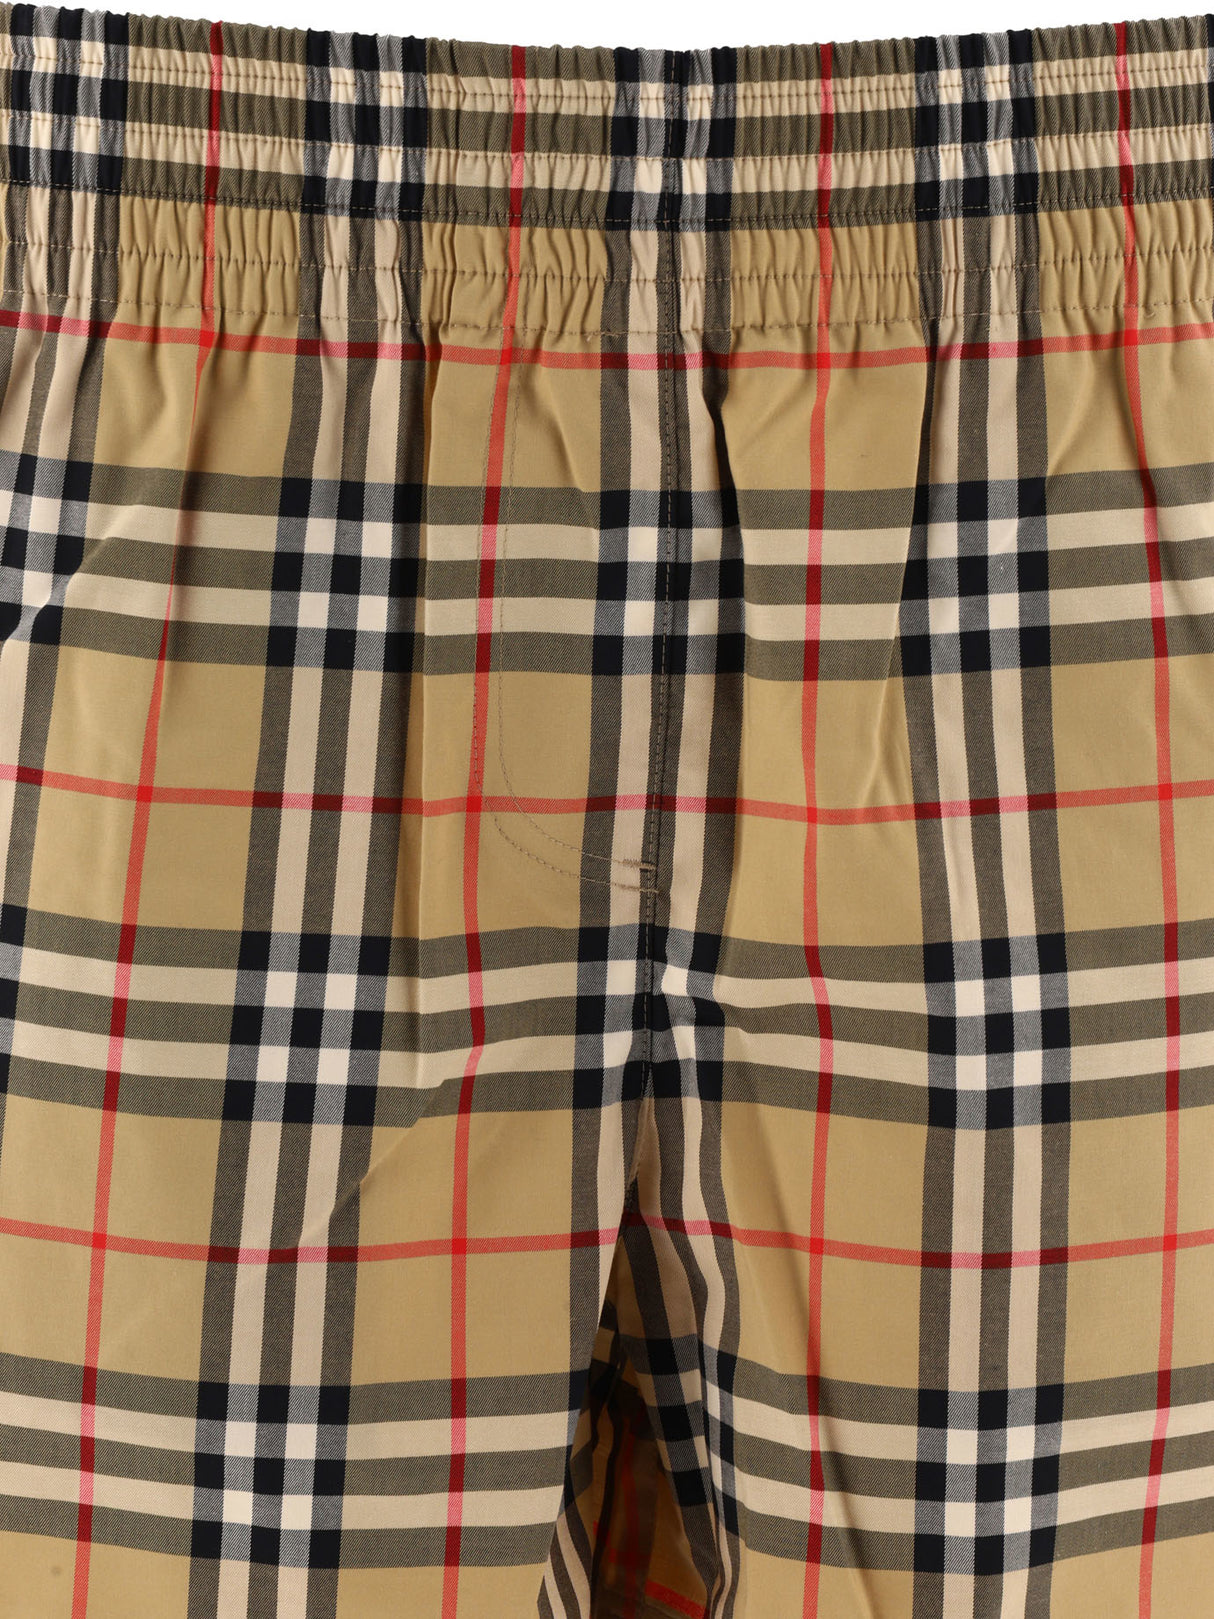 Classy Tan Women's Shorts with Belt by BURBERRY